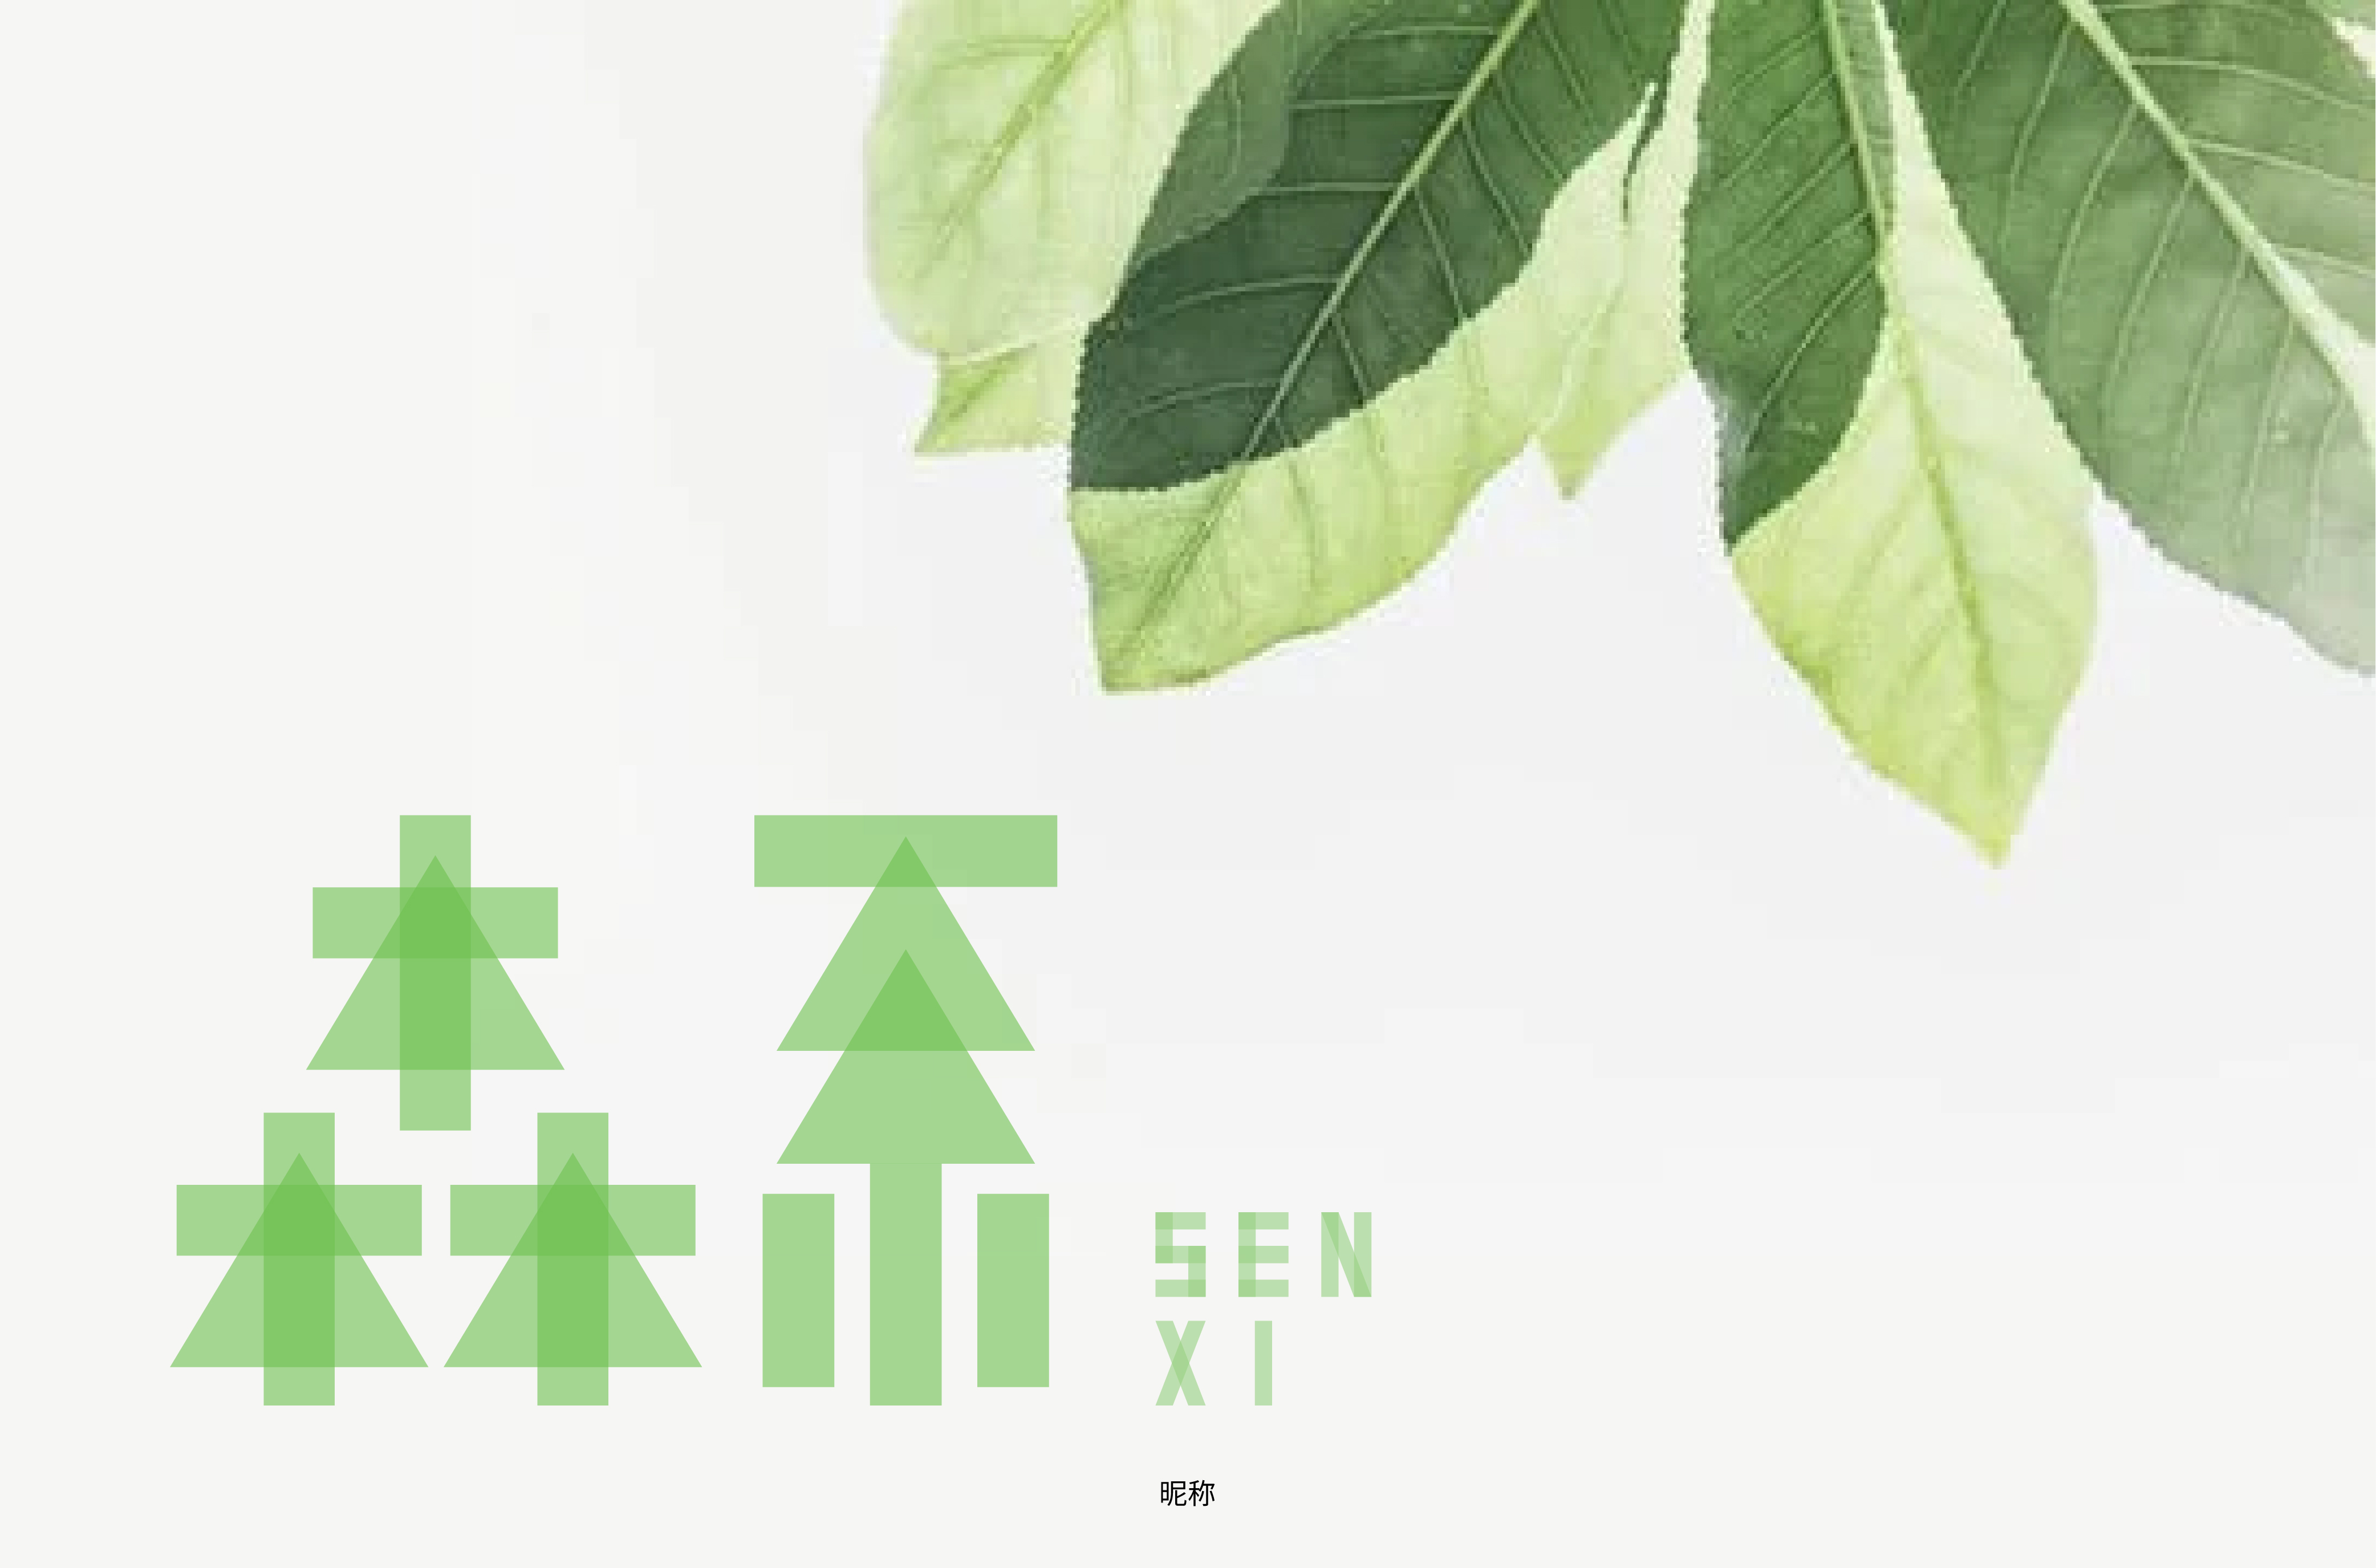 Creative font design with different styles and backgrounds based on the word Senxi